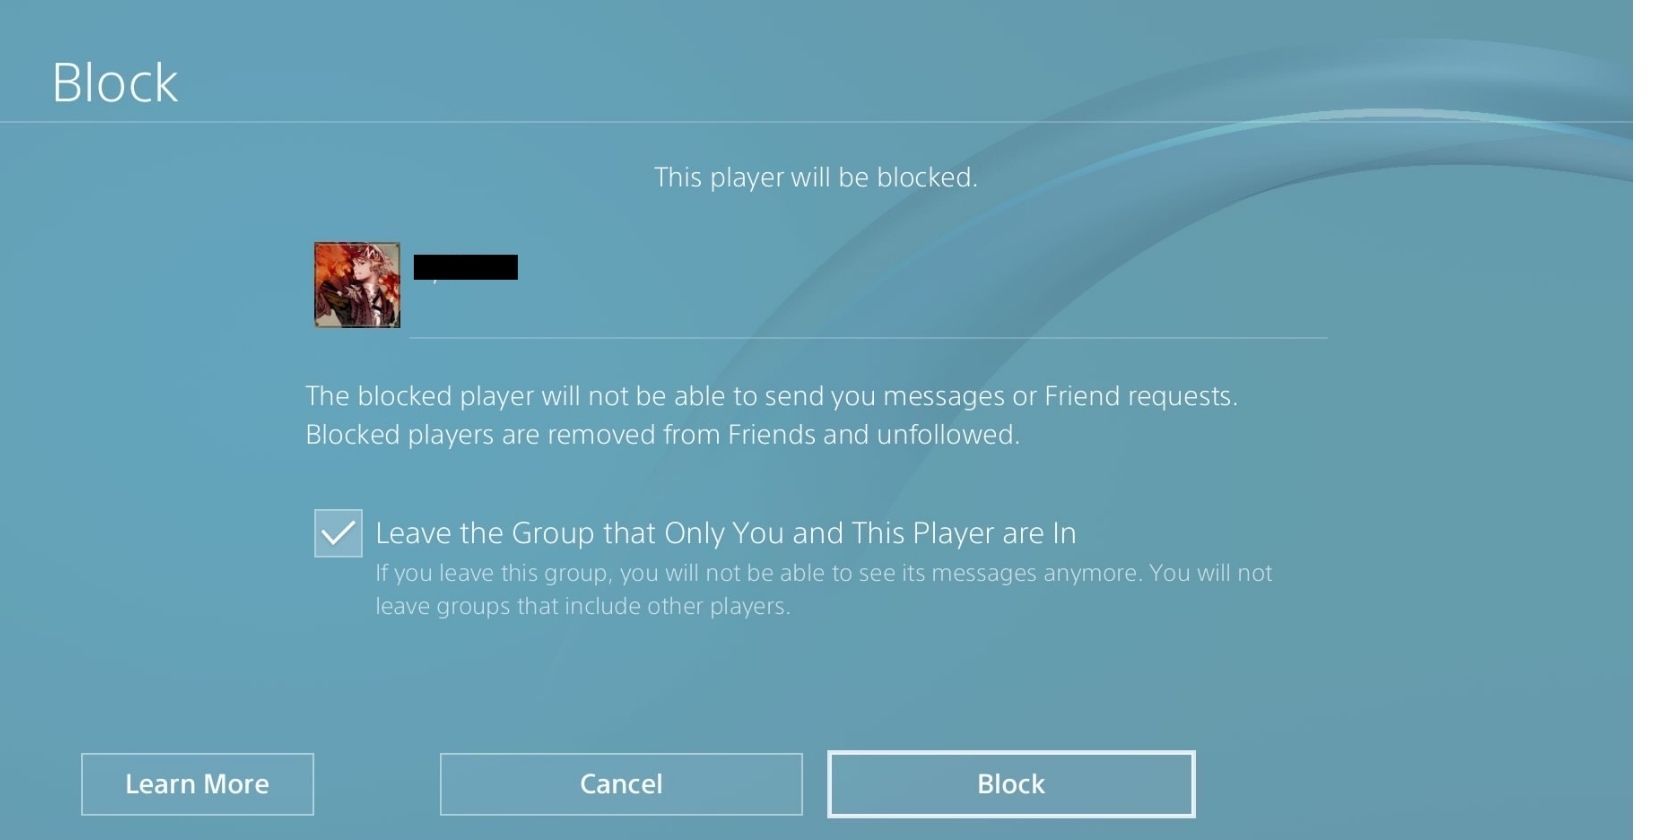 korrelat Overveje Lingvistik How to Block and Report Users Using Your PS4 or PlayStation App